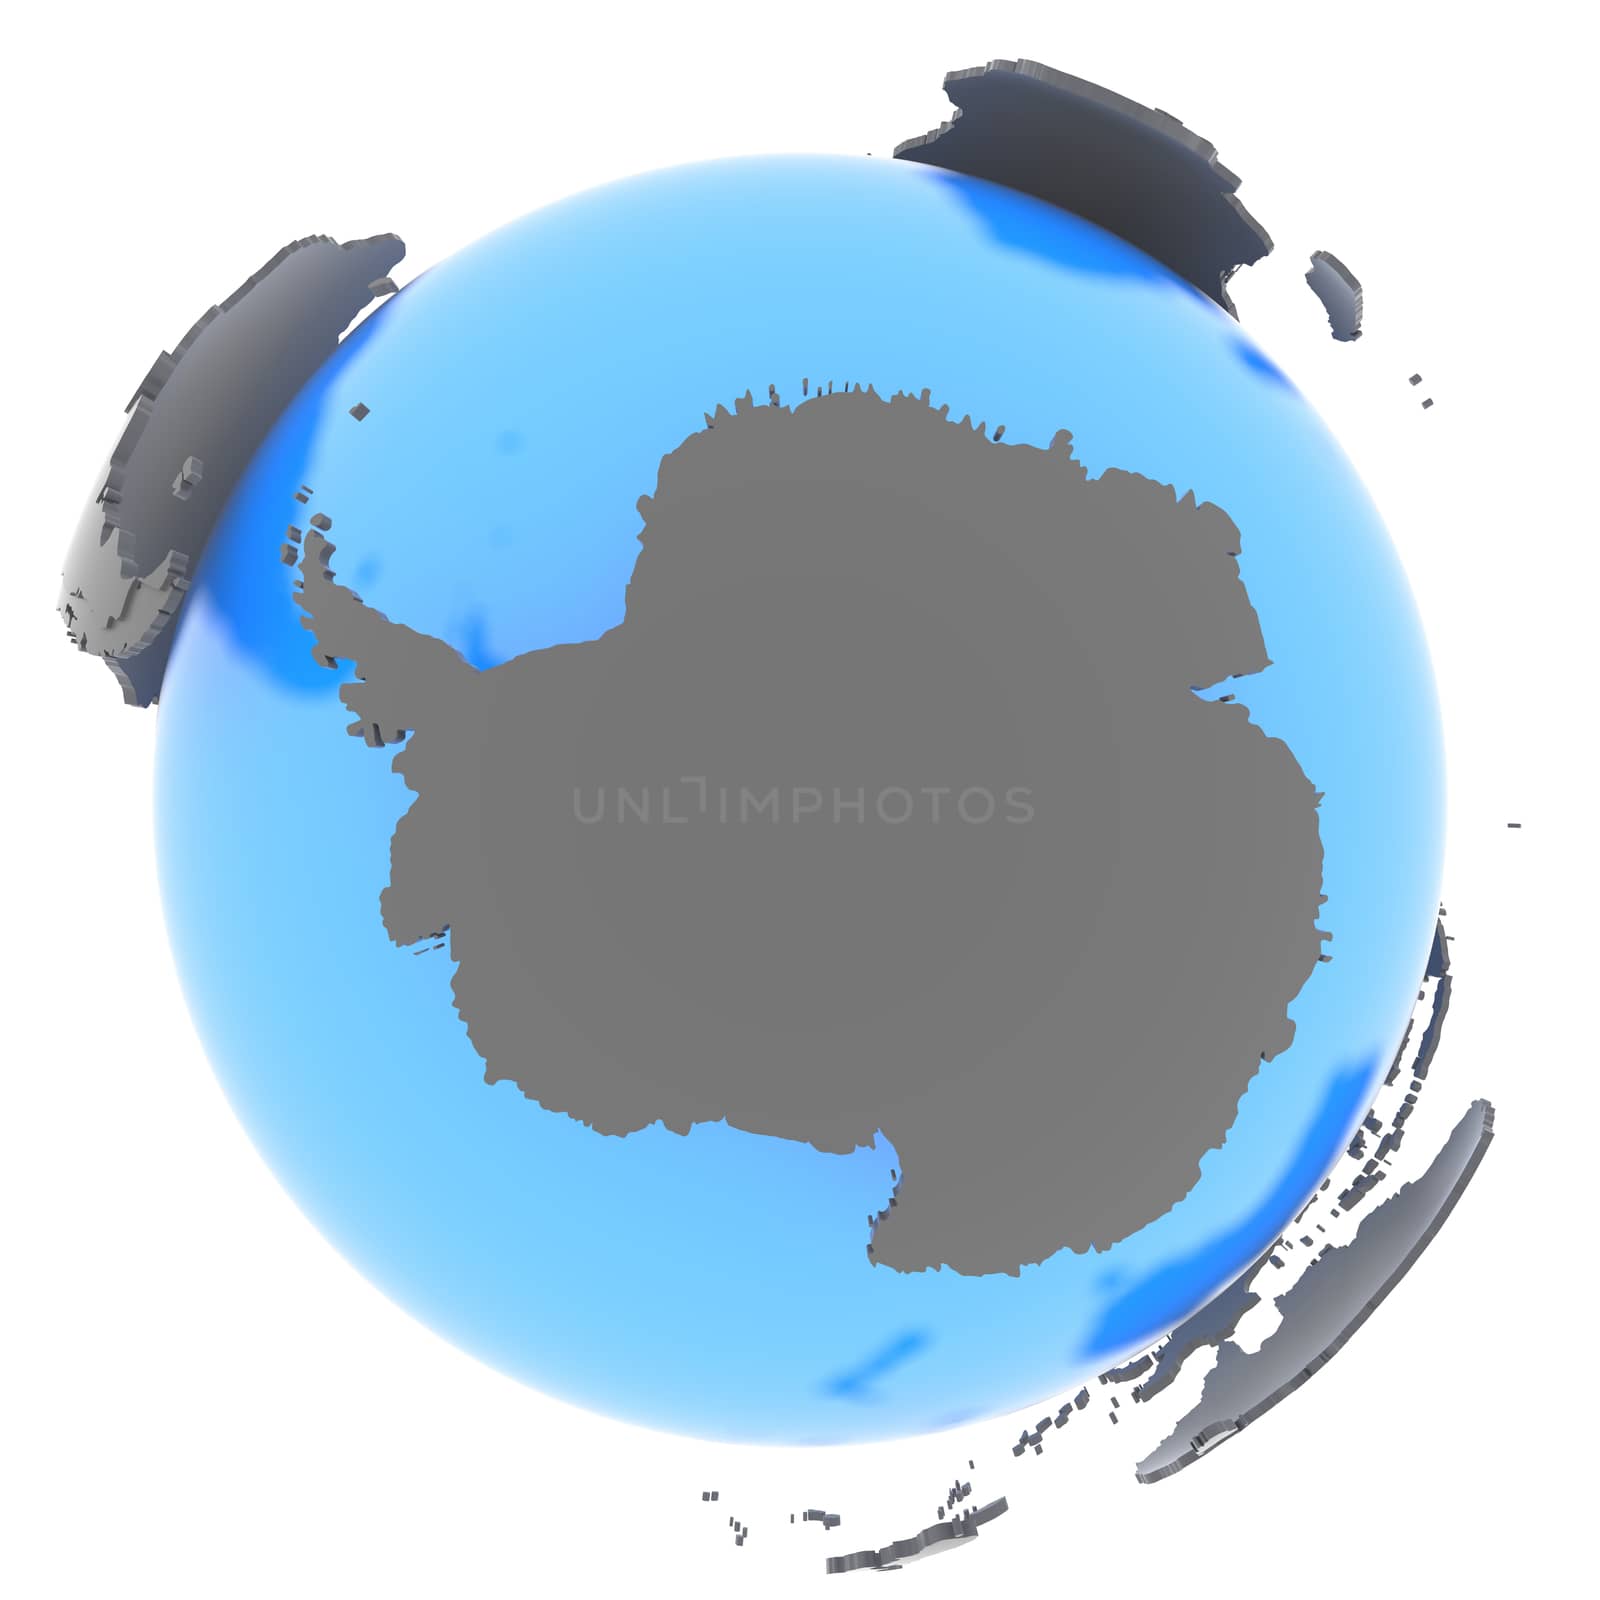 Antarctic on Earth by Harvepino